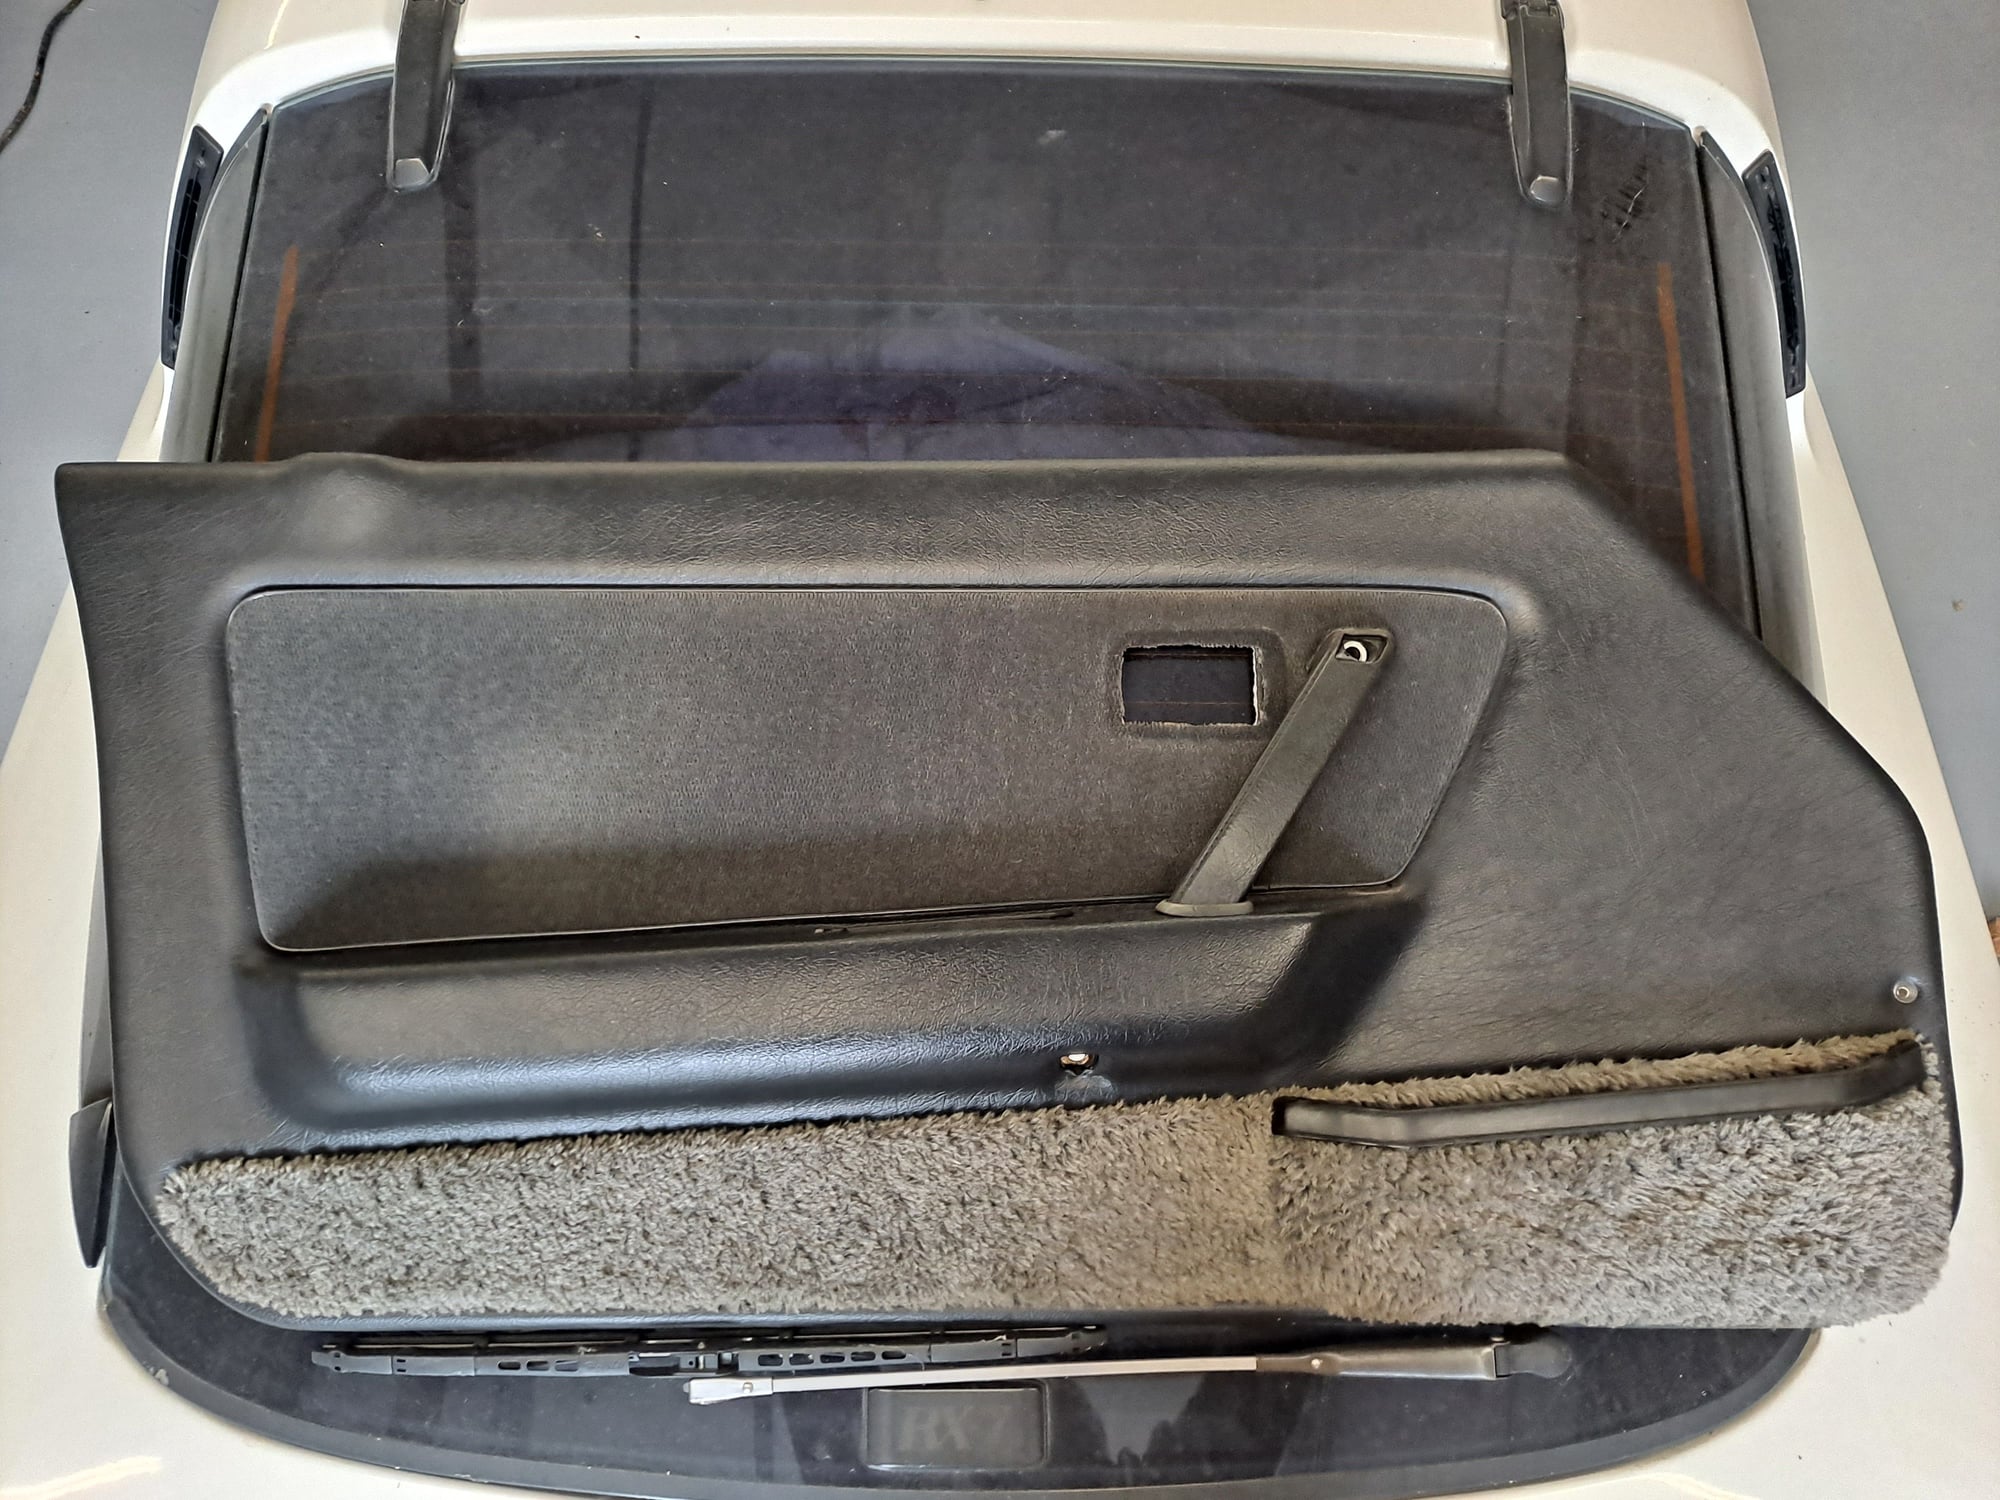 Interior/Upholstery - GSL-SE door cards grey - Used - 1979 to 1985 Mazda RX-7 - Liberty, MO 64068, United States